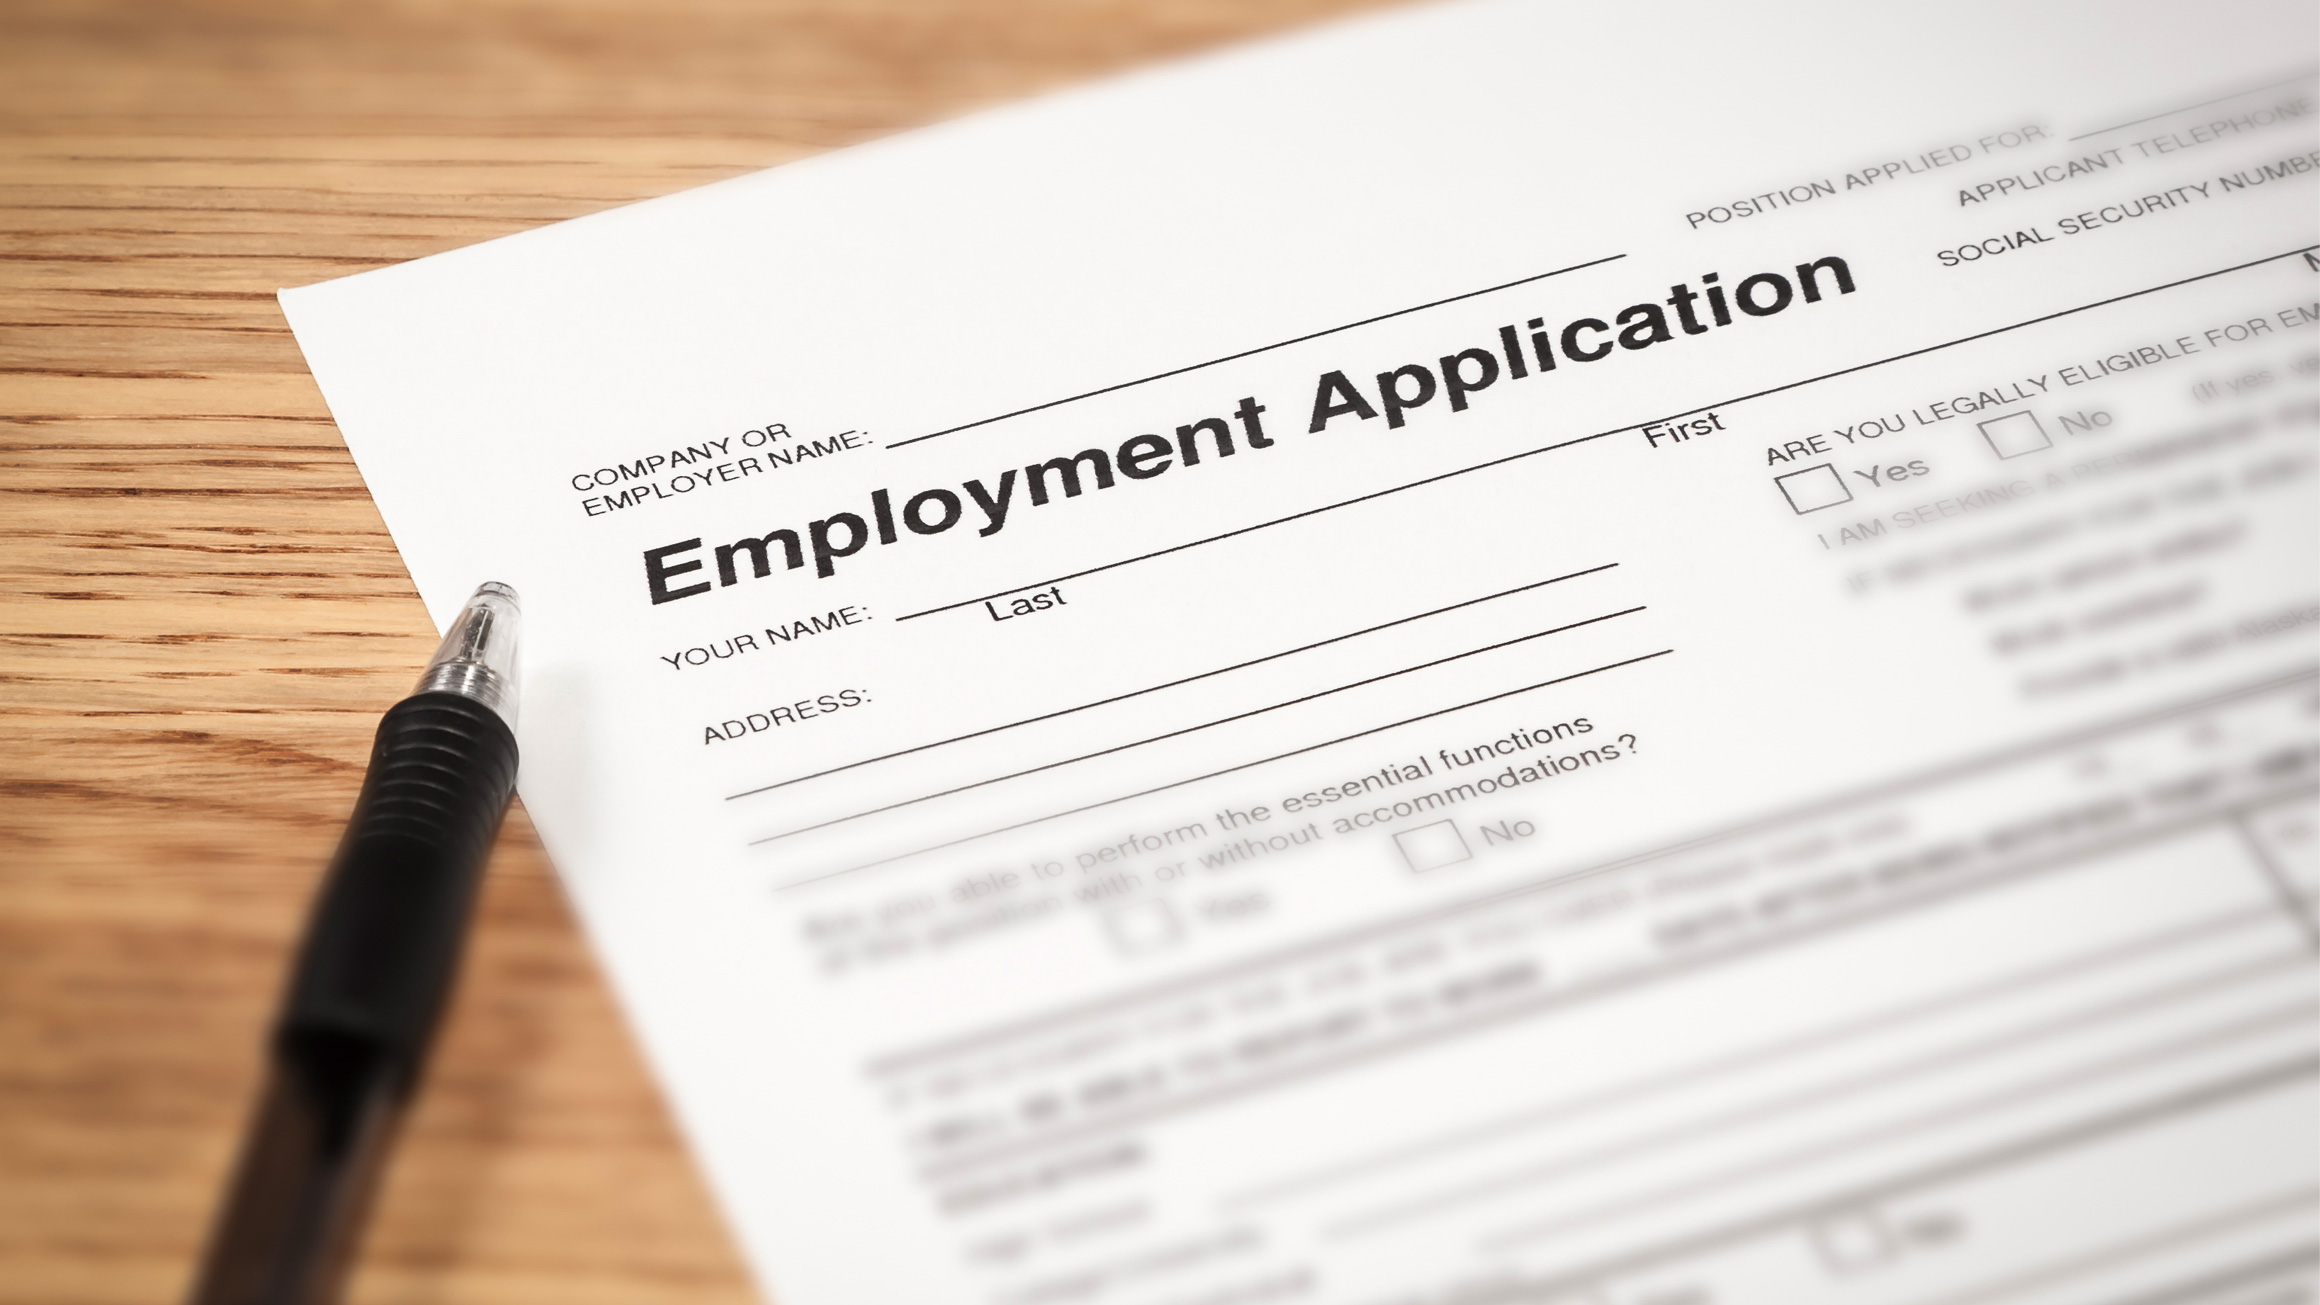 An employment application is shown with a pen on a wooden surface